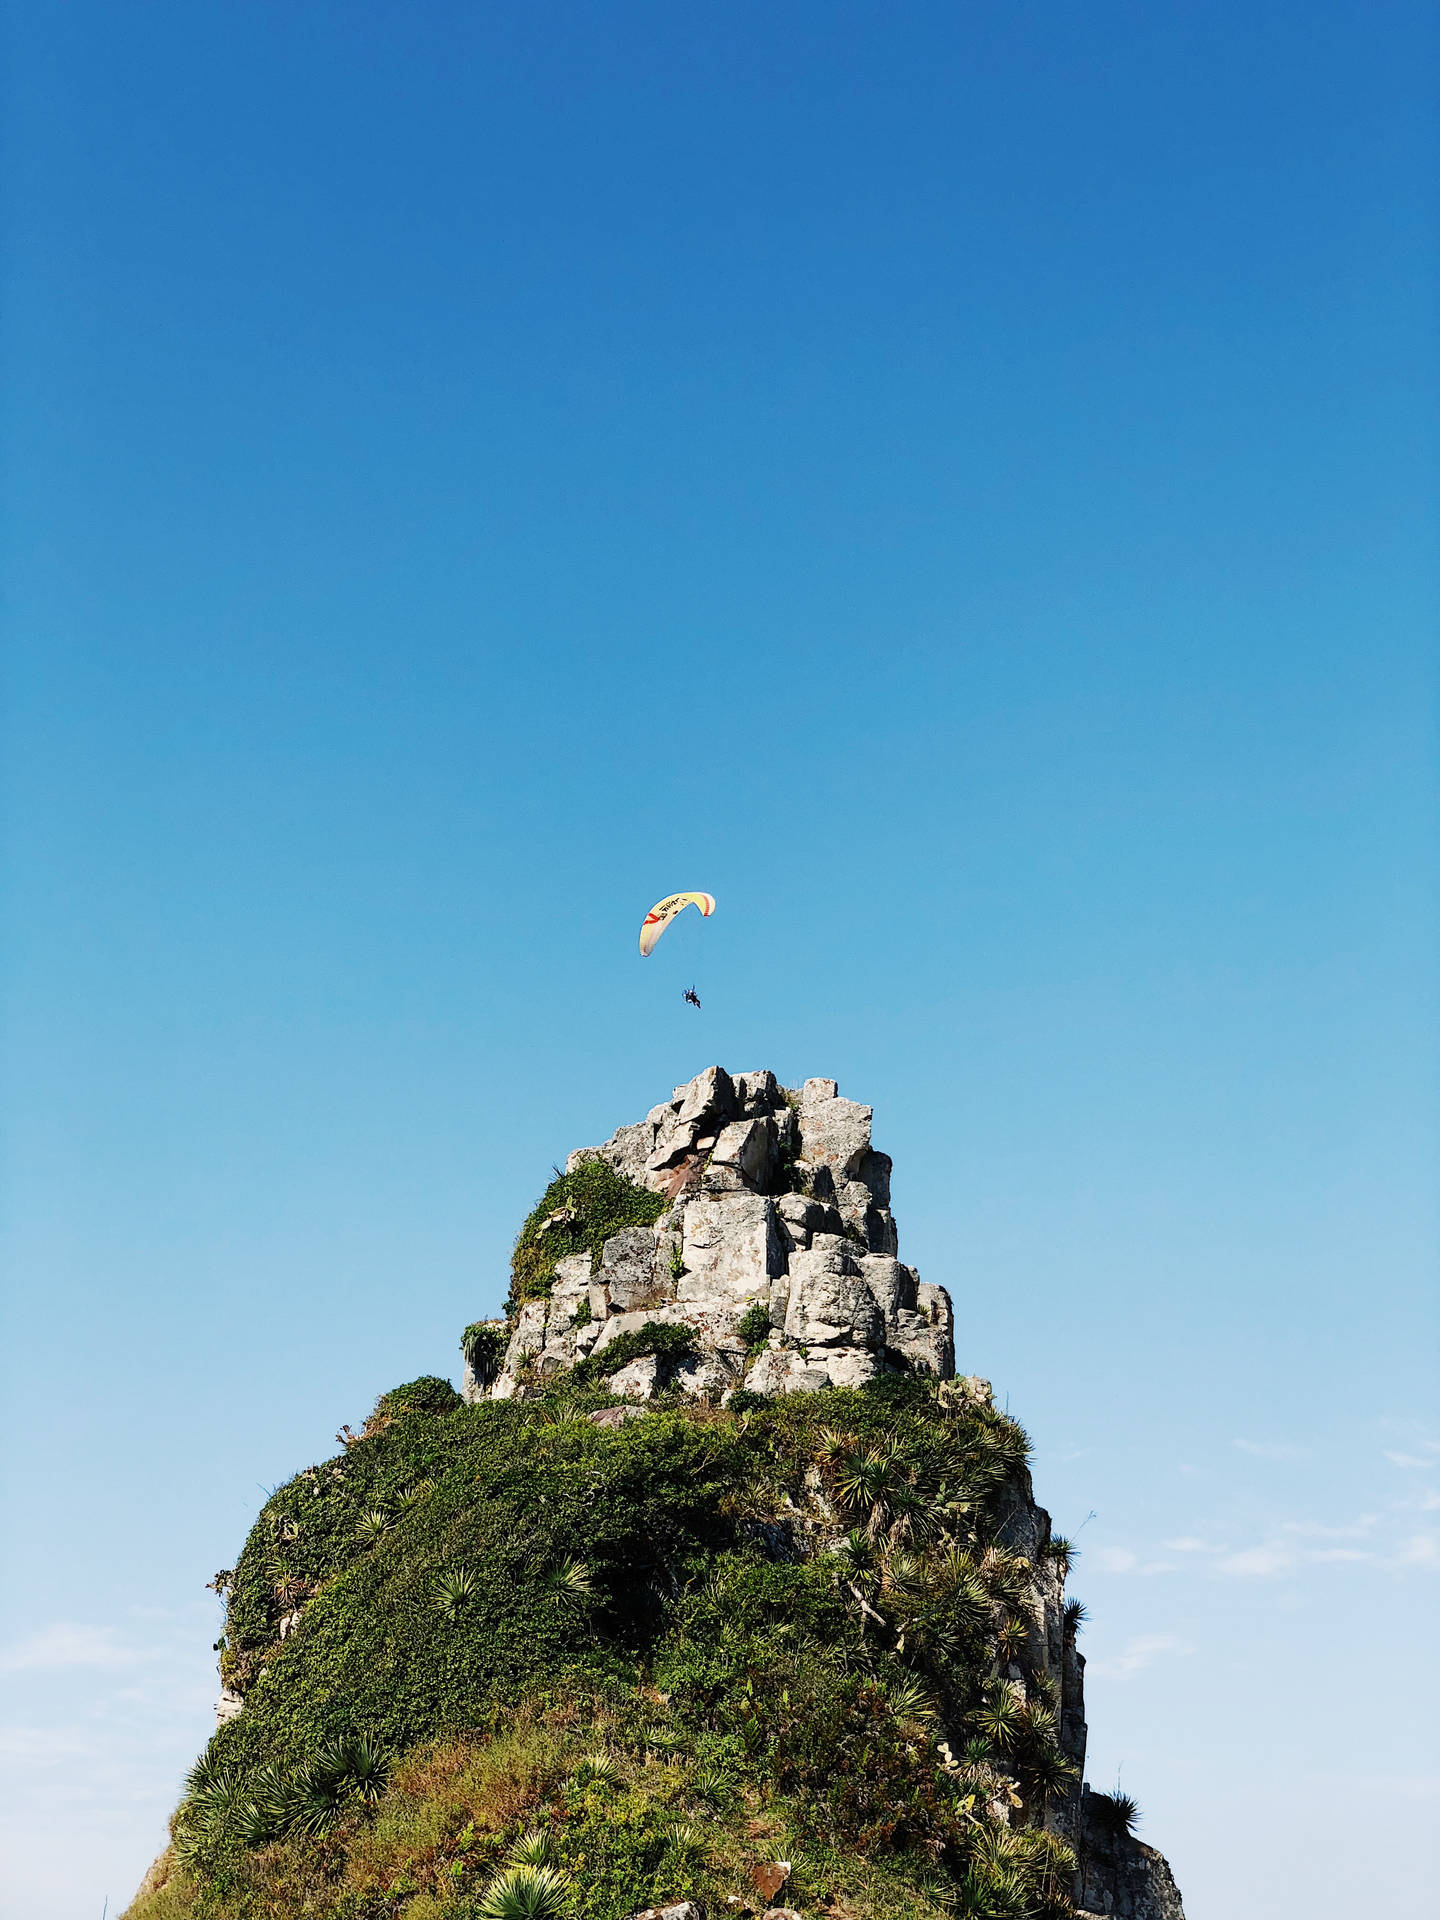 Paragliding Above Pointed Rock Cliff Background